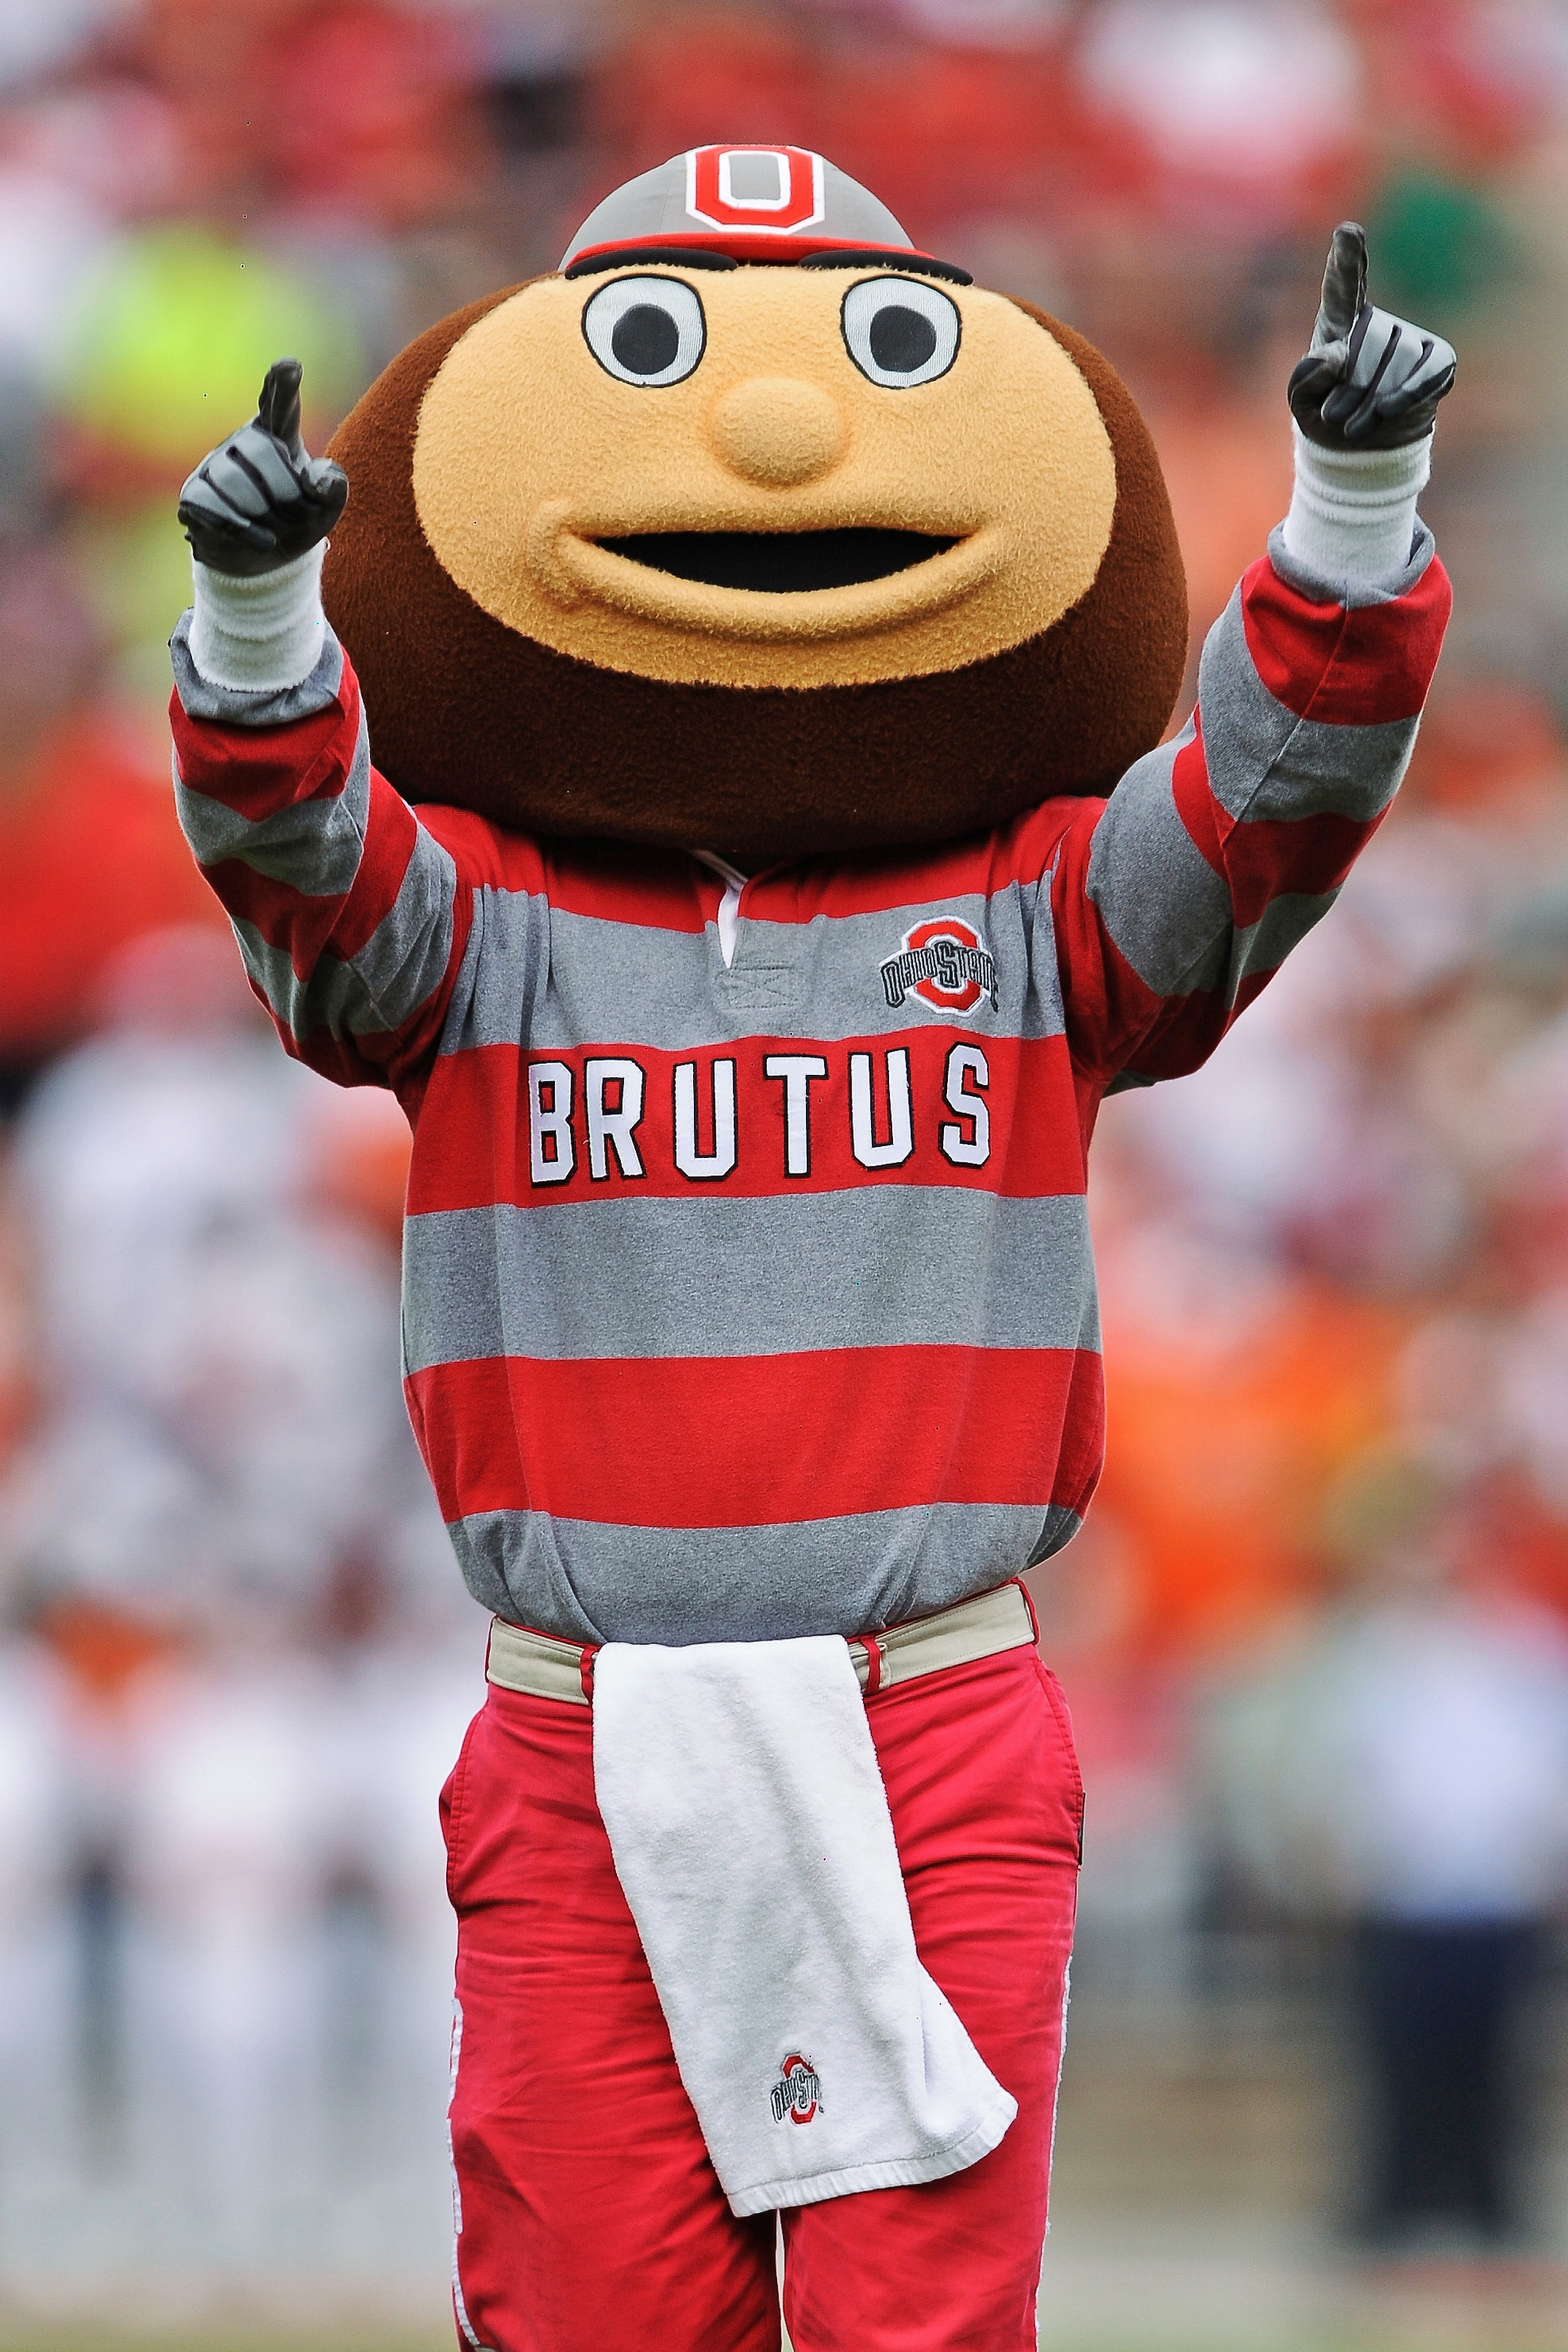 COLUMBUS, OH - SEPTEMBER 11:  Mascot Brutus Buckeye fires up the crowd before a game against the Miami Hurricanes at Ohio Stadium on September 11, 2010 in Columbus, Ohio.  (Photo by Jamie Sabau/Getty Images)